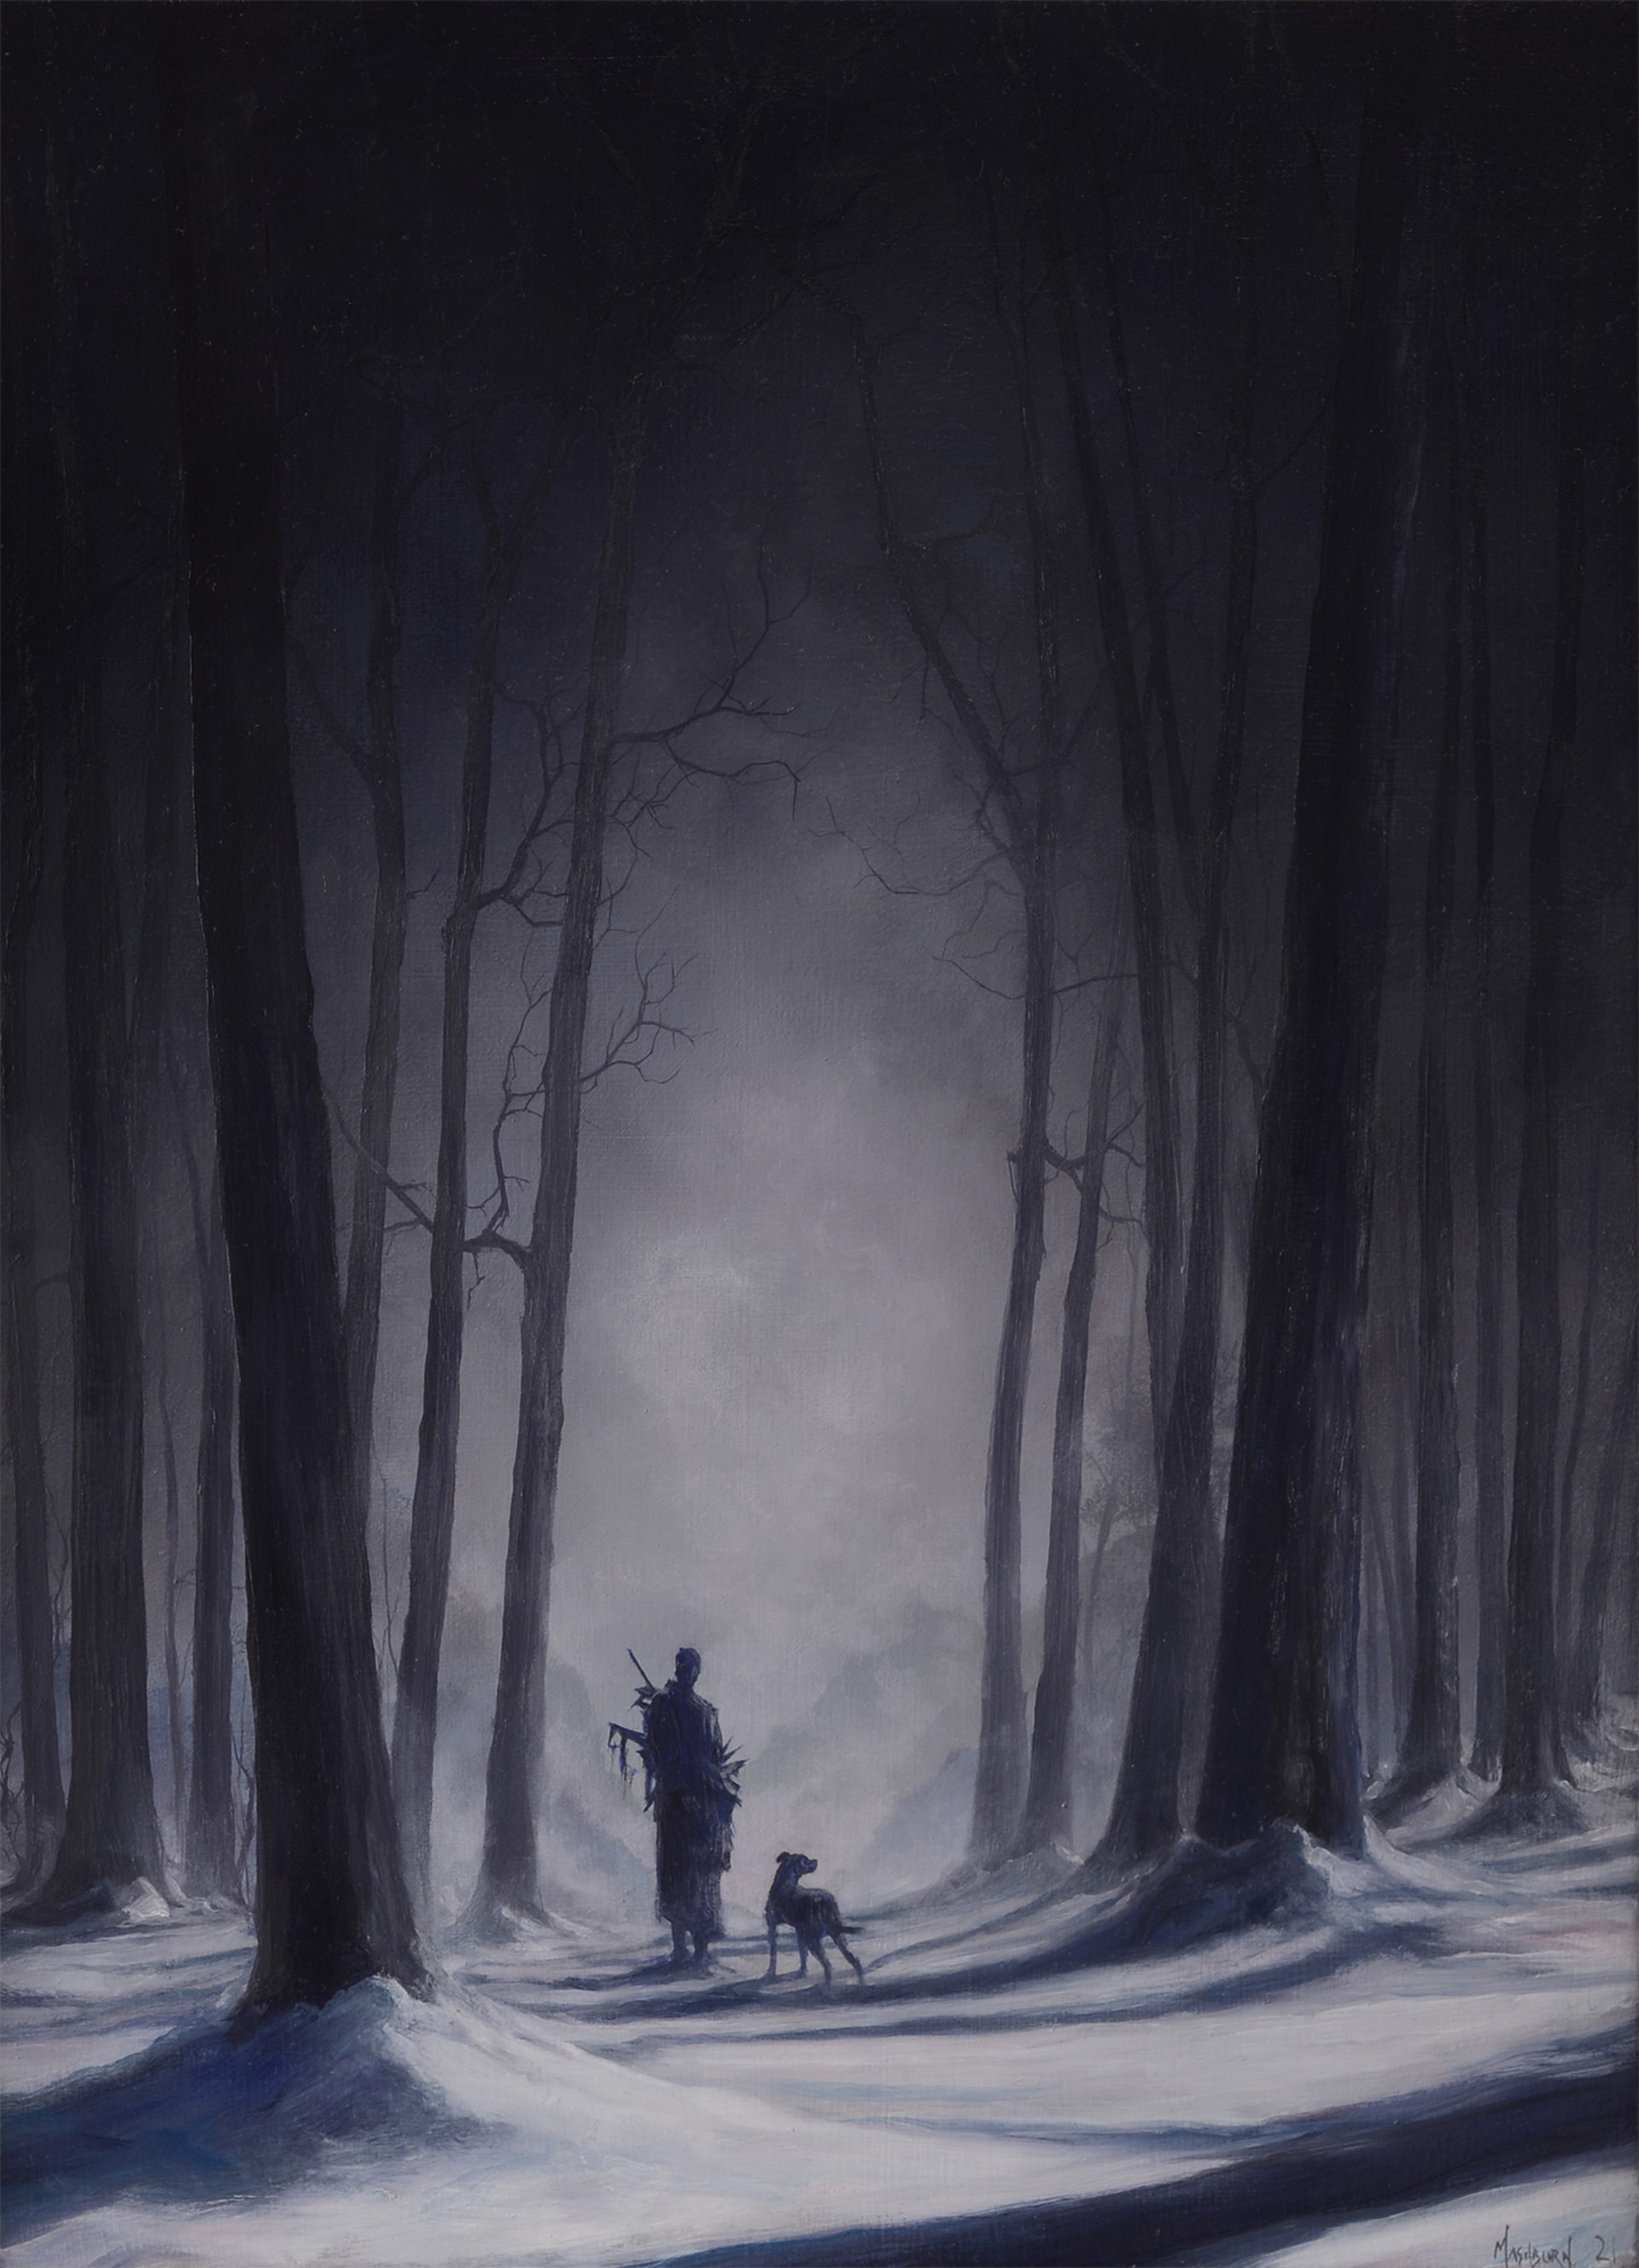 Boy with Dog in the Forest at Night by Brian Mashburn